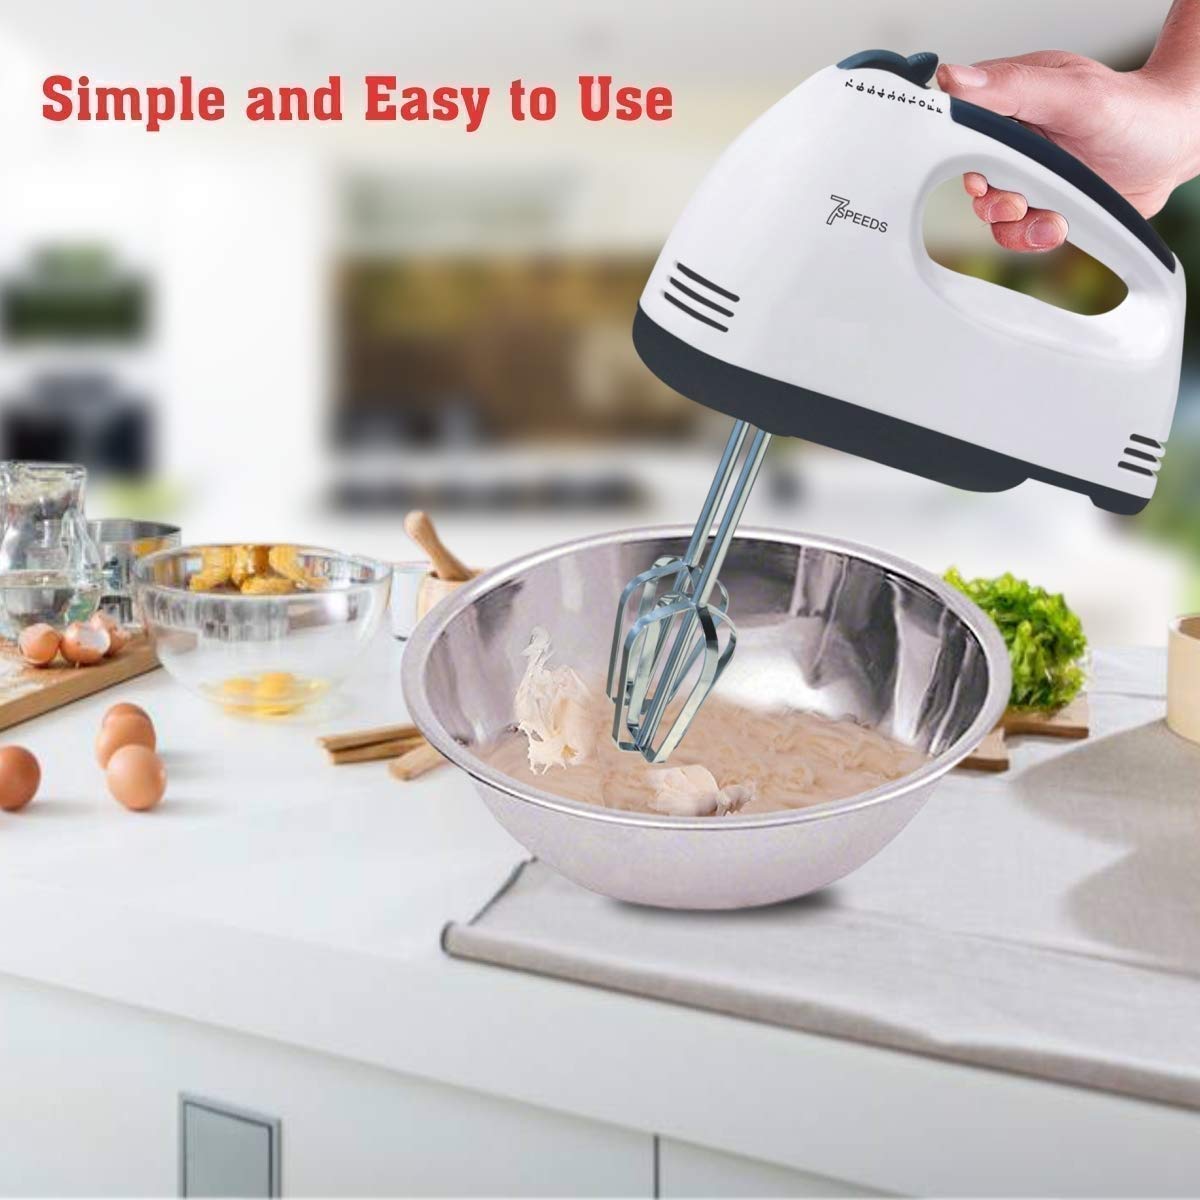 2143 Compact Hand Electric Mixer/Blender for Whipping/Mixing with Attachments - SkyShopy